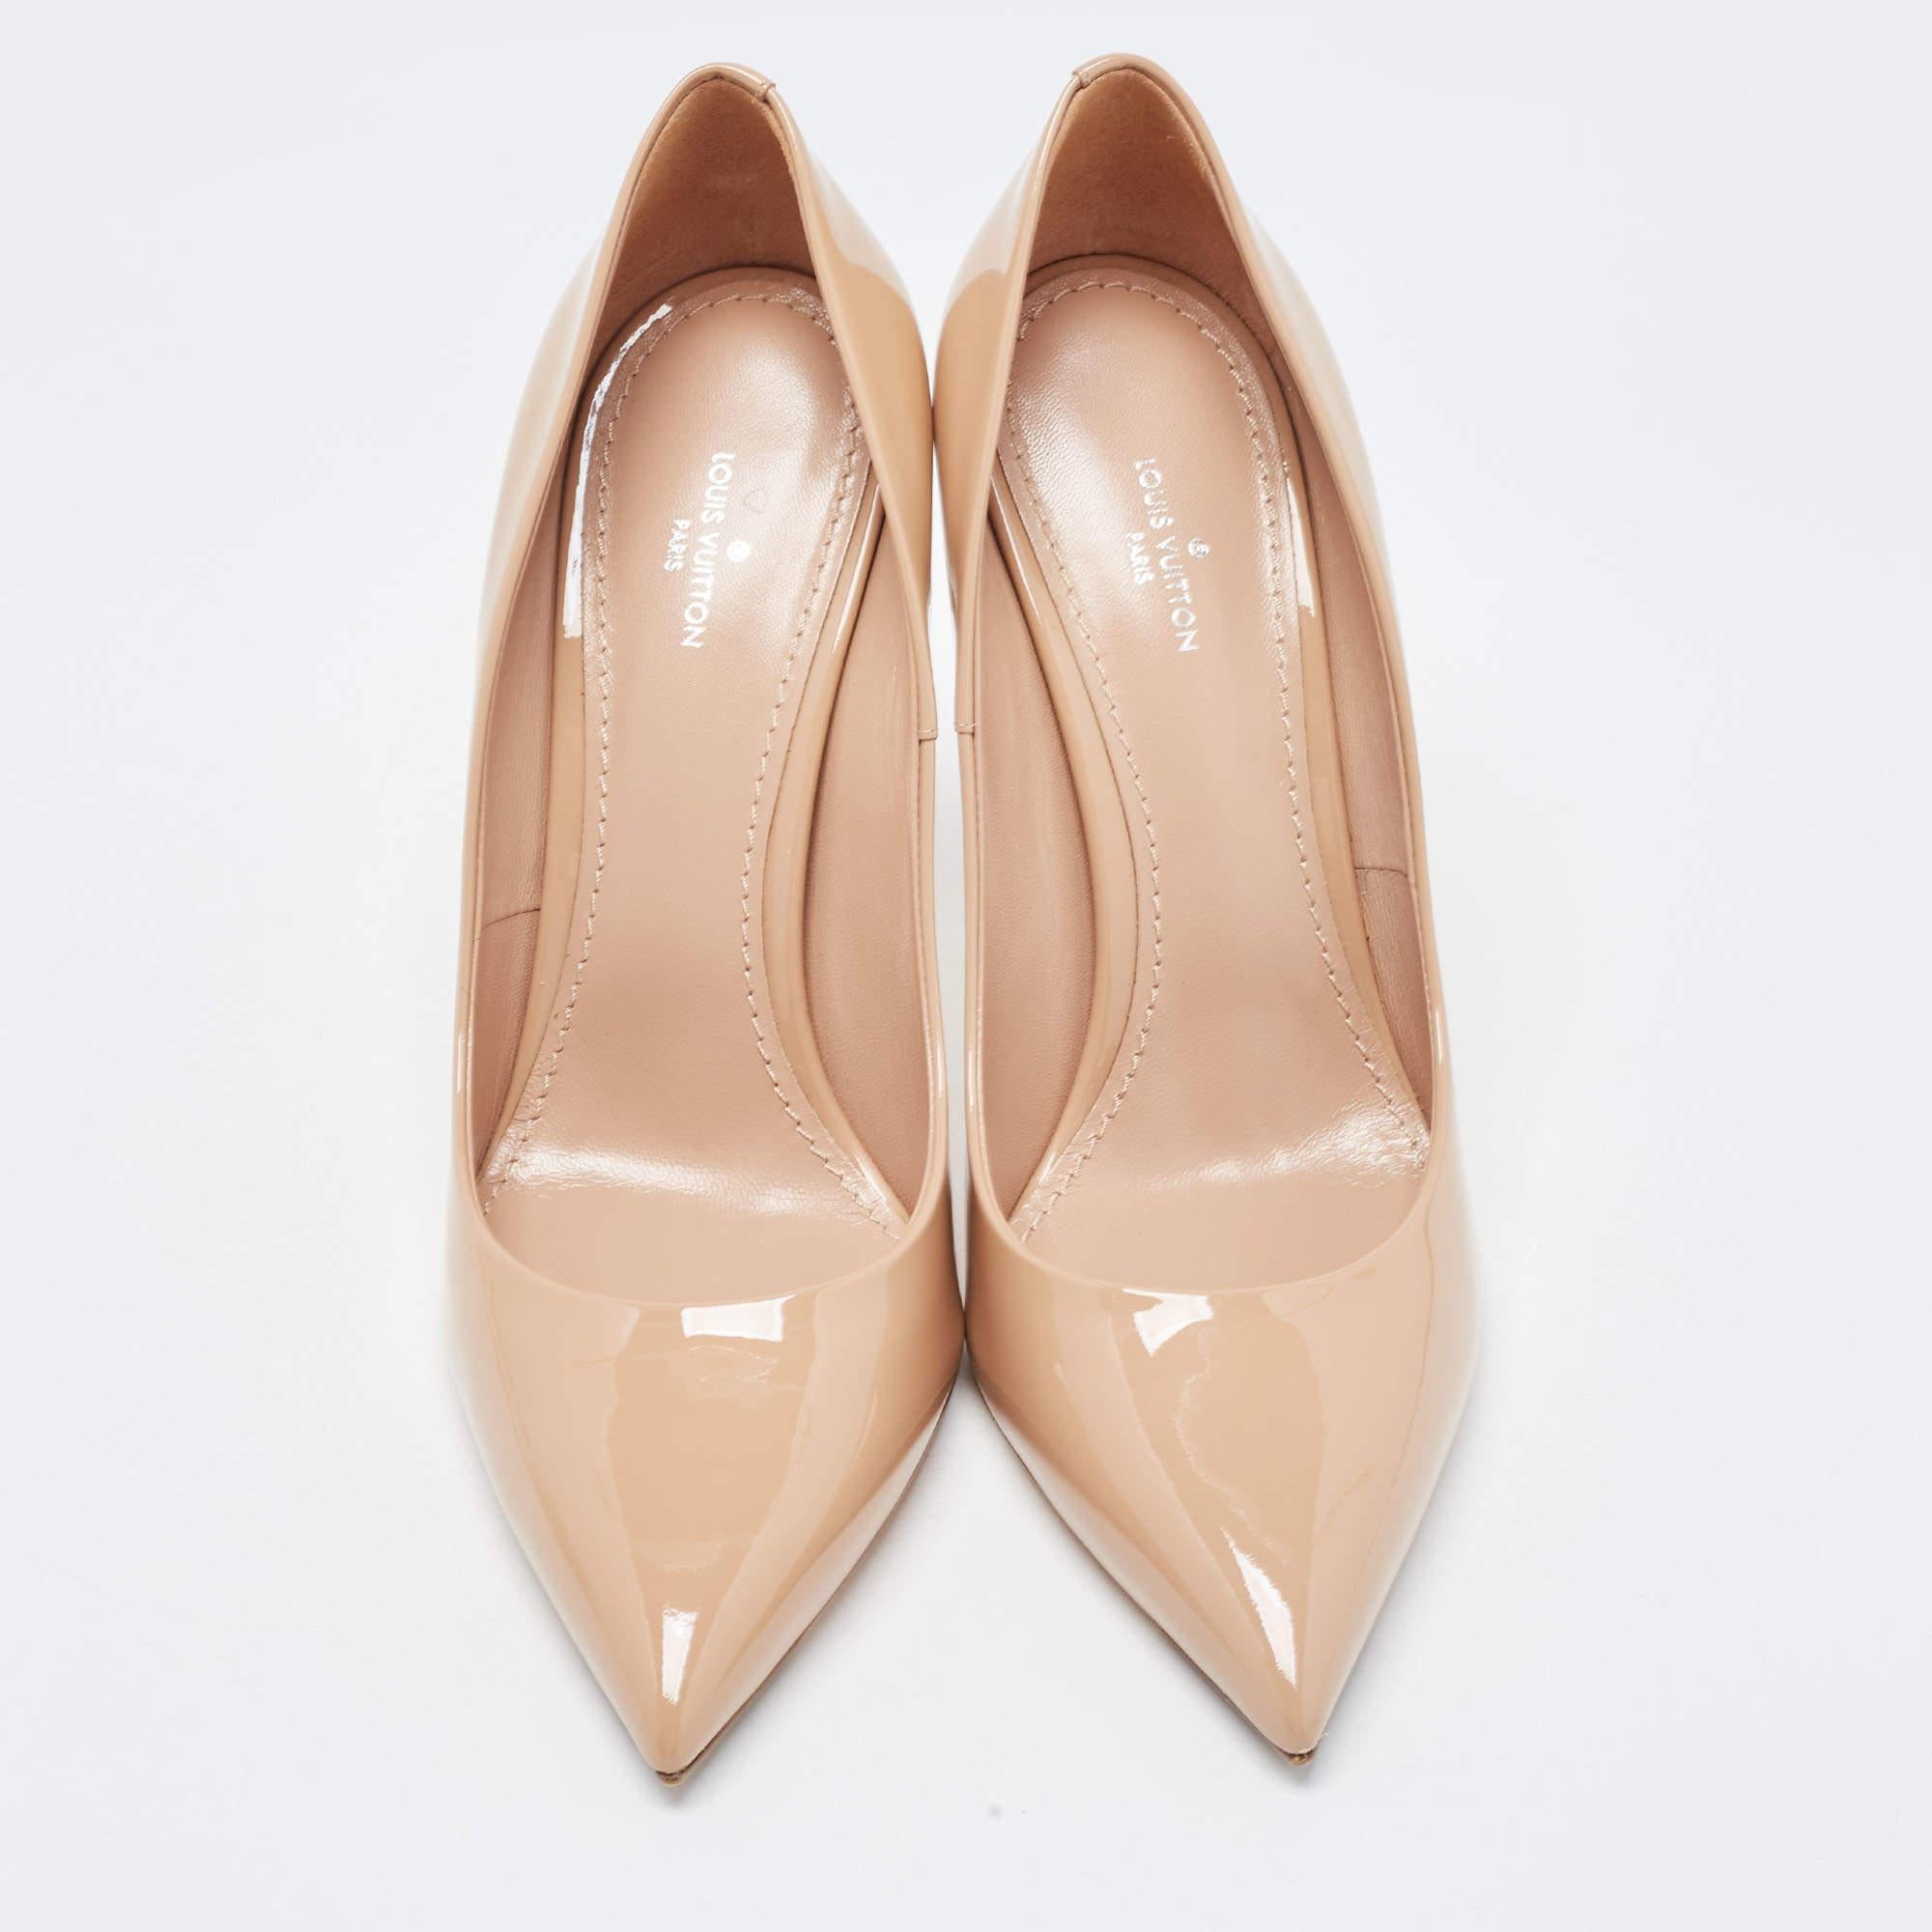 Louis Vuitton Beige Patent Leather Eyeline Pointed Toe Pumps Size 38.5 1